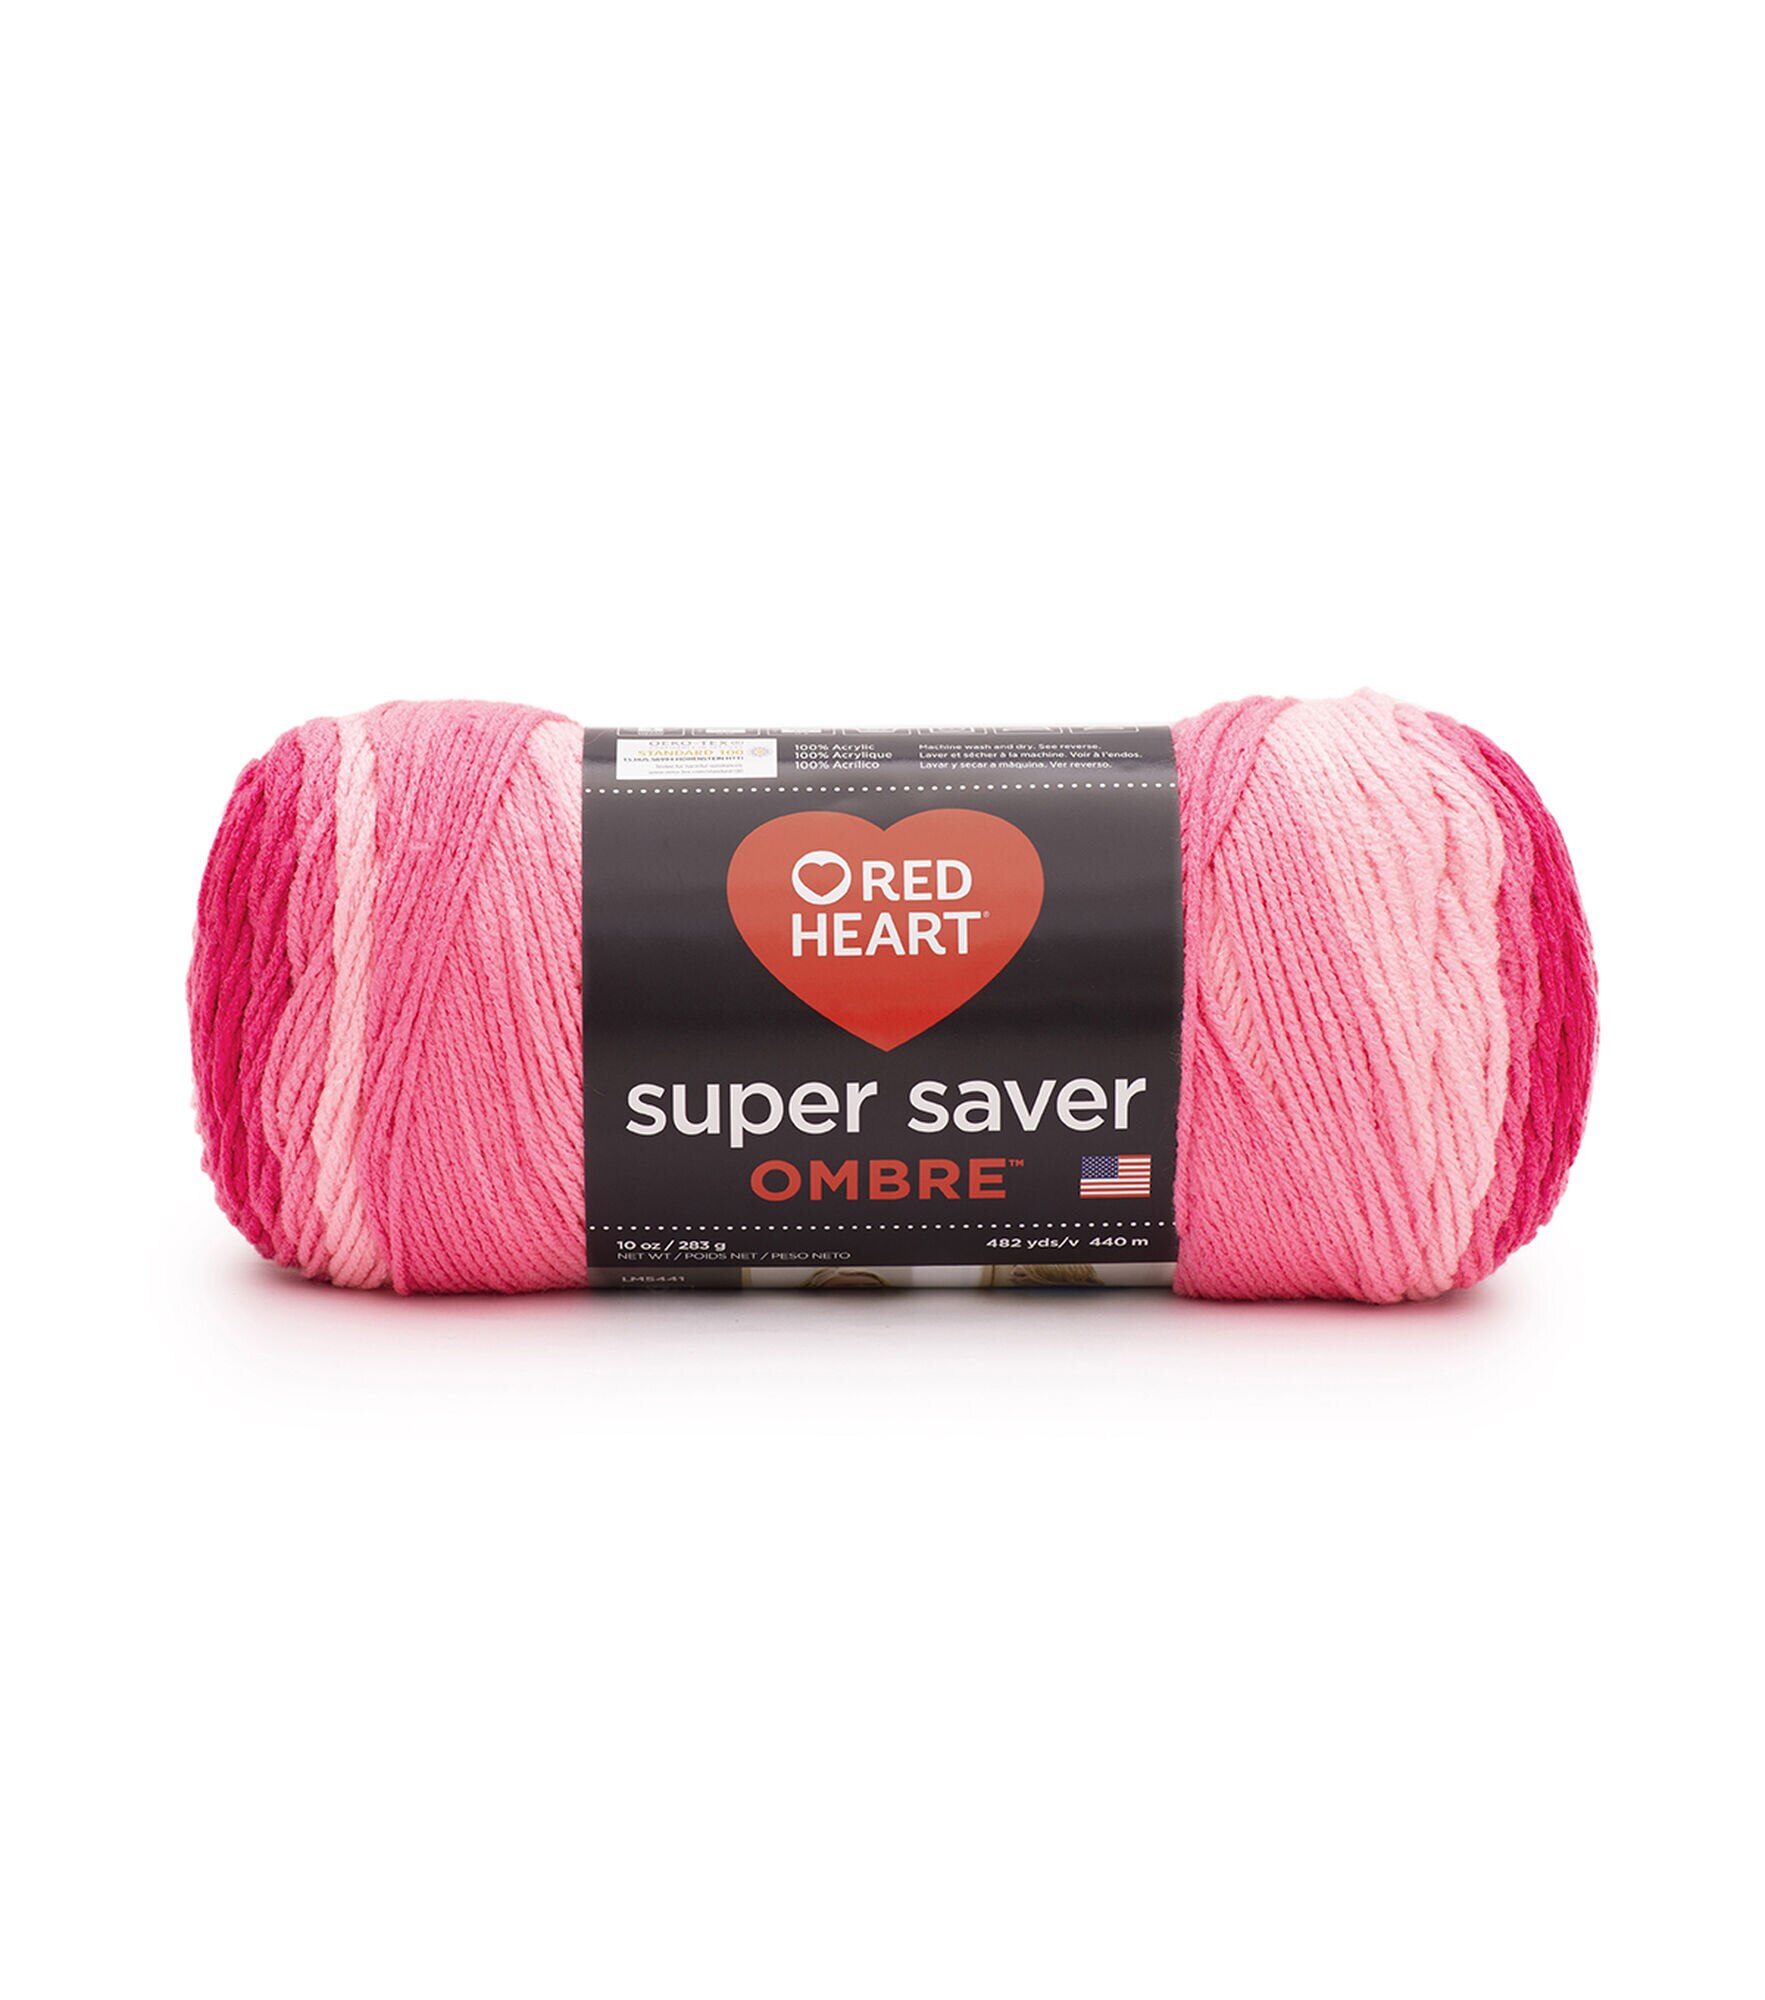 Red Heart Super Saver Ombre Yarn, Green Apple